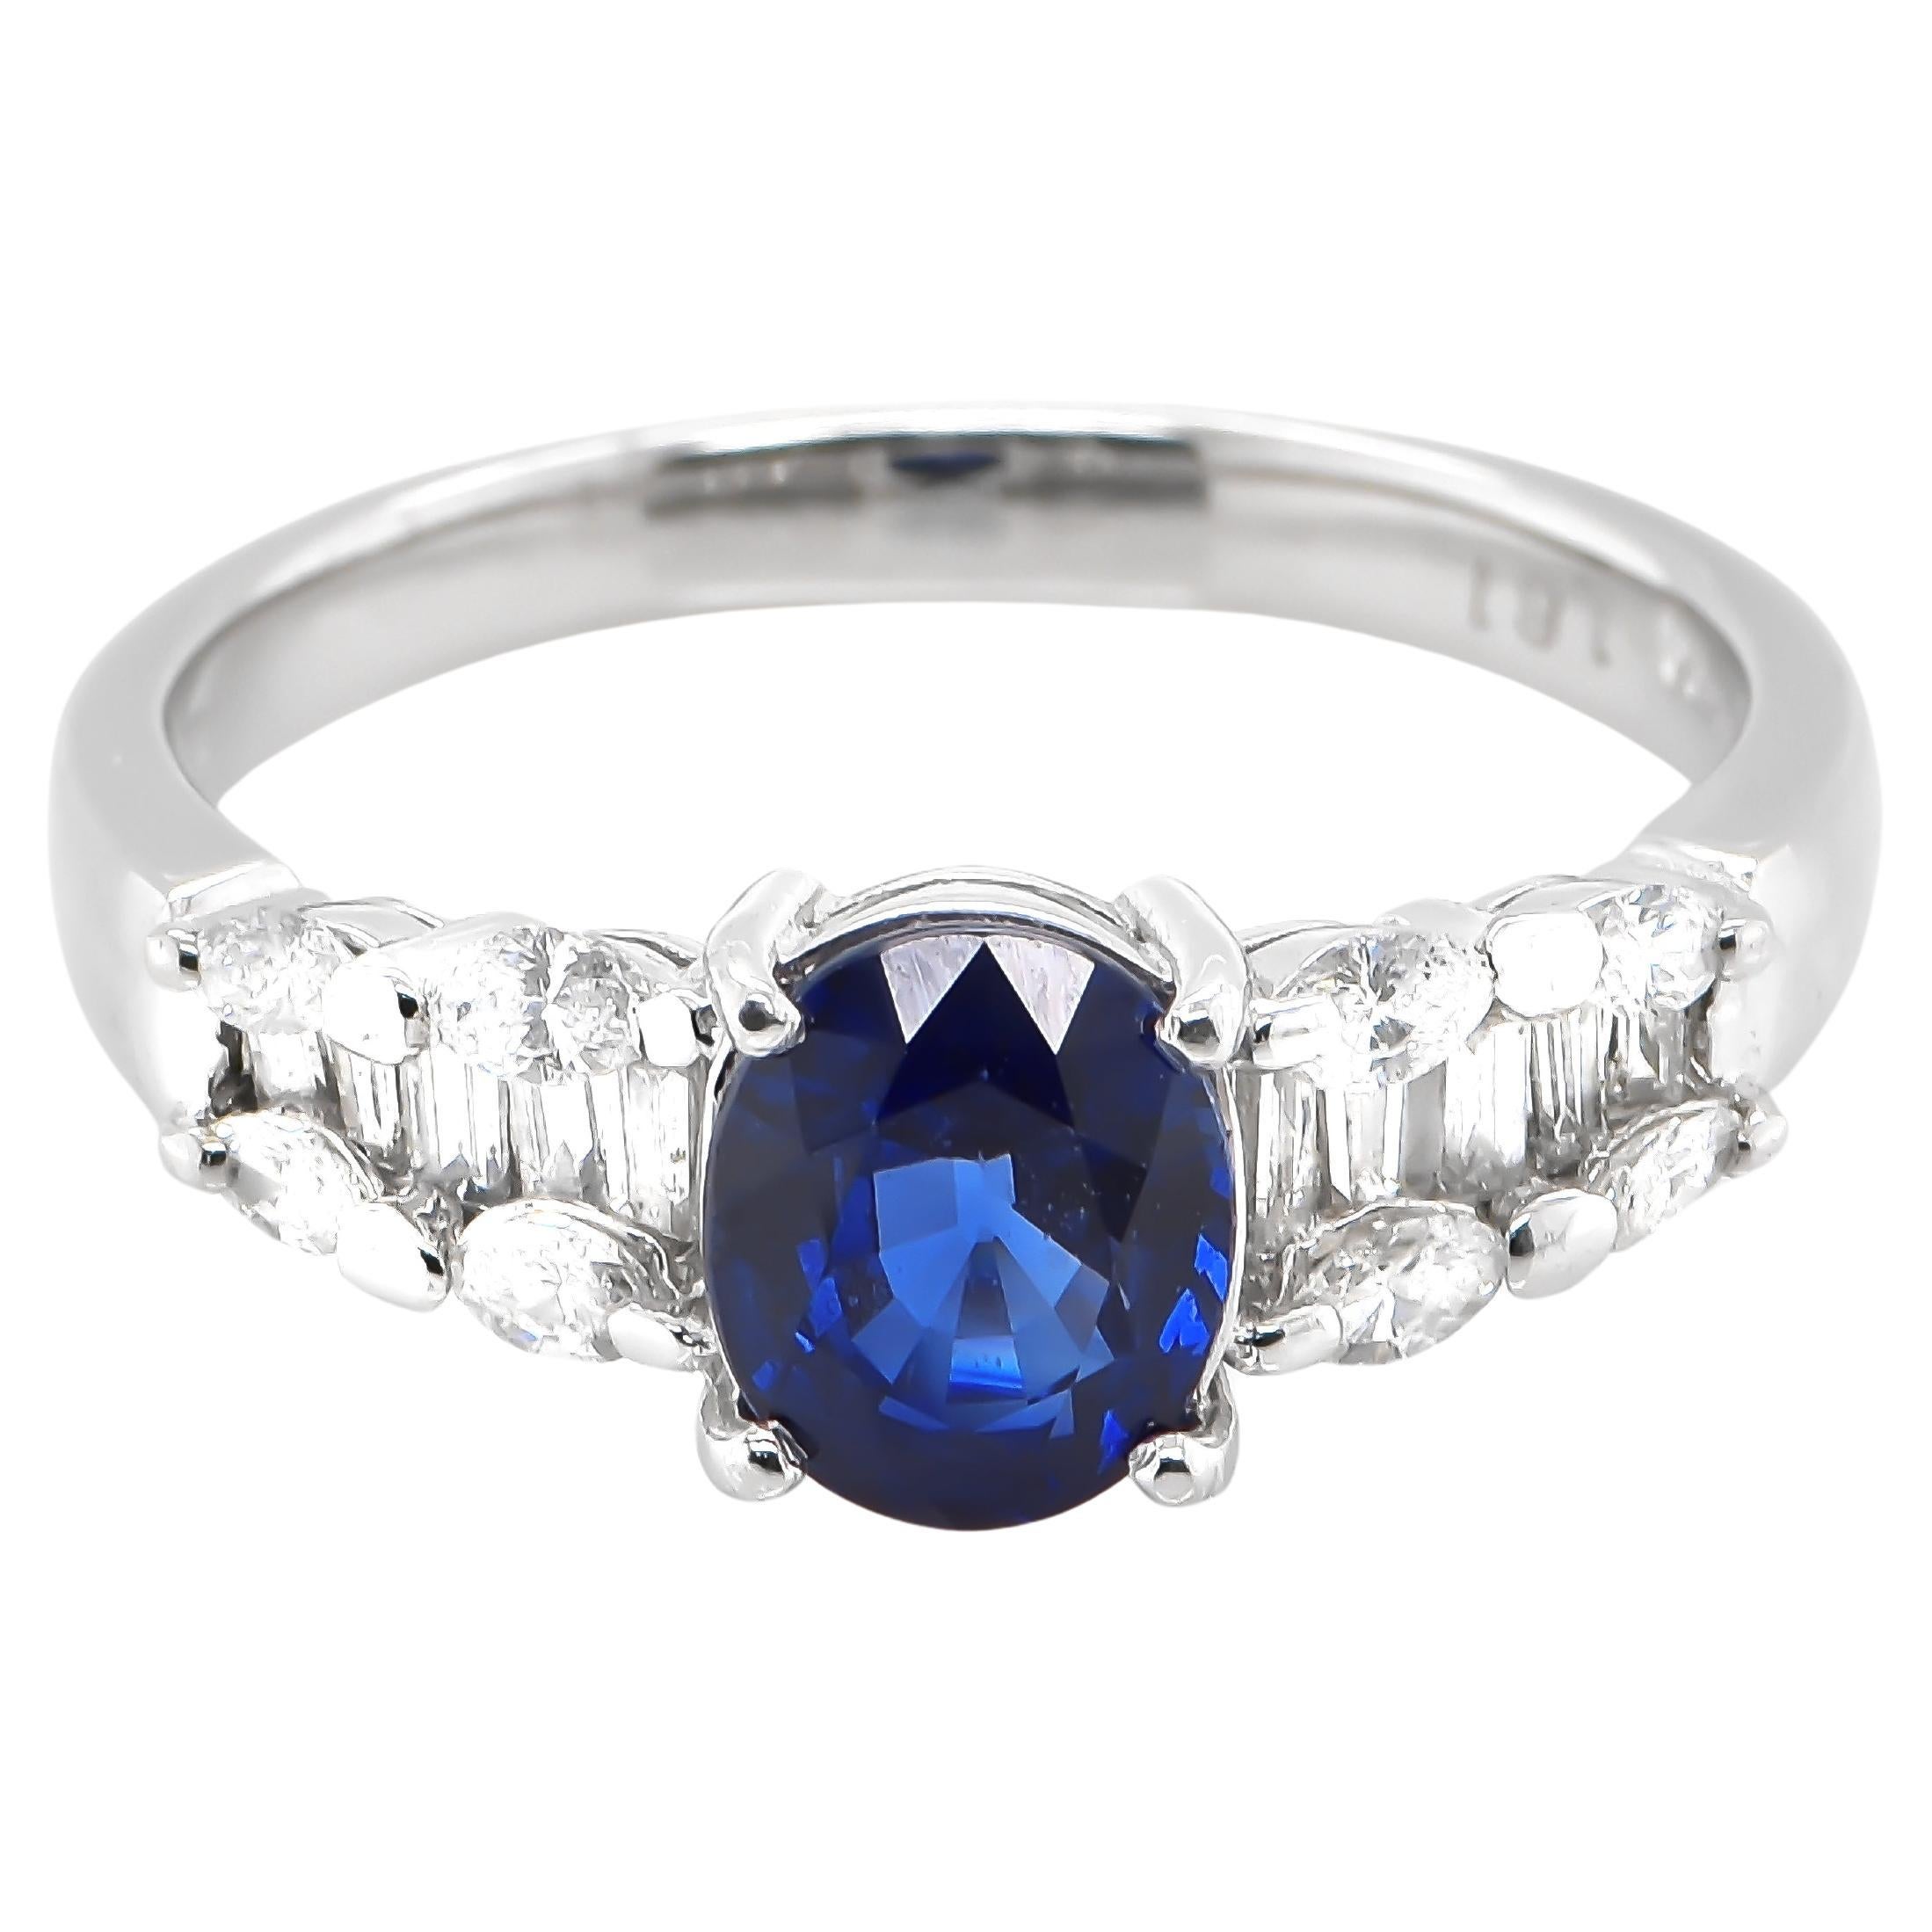 1.61 Carat Natural Royal Blue Sapphire and Diamond Ring Made in Platinum For Sale